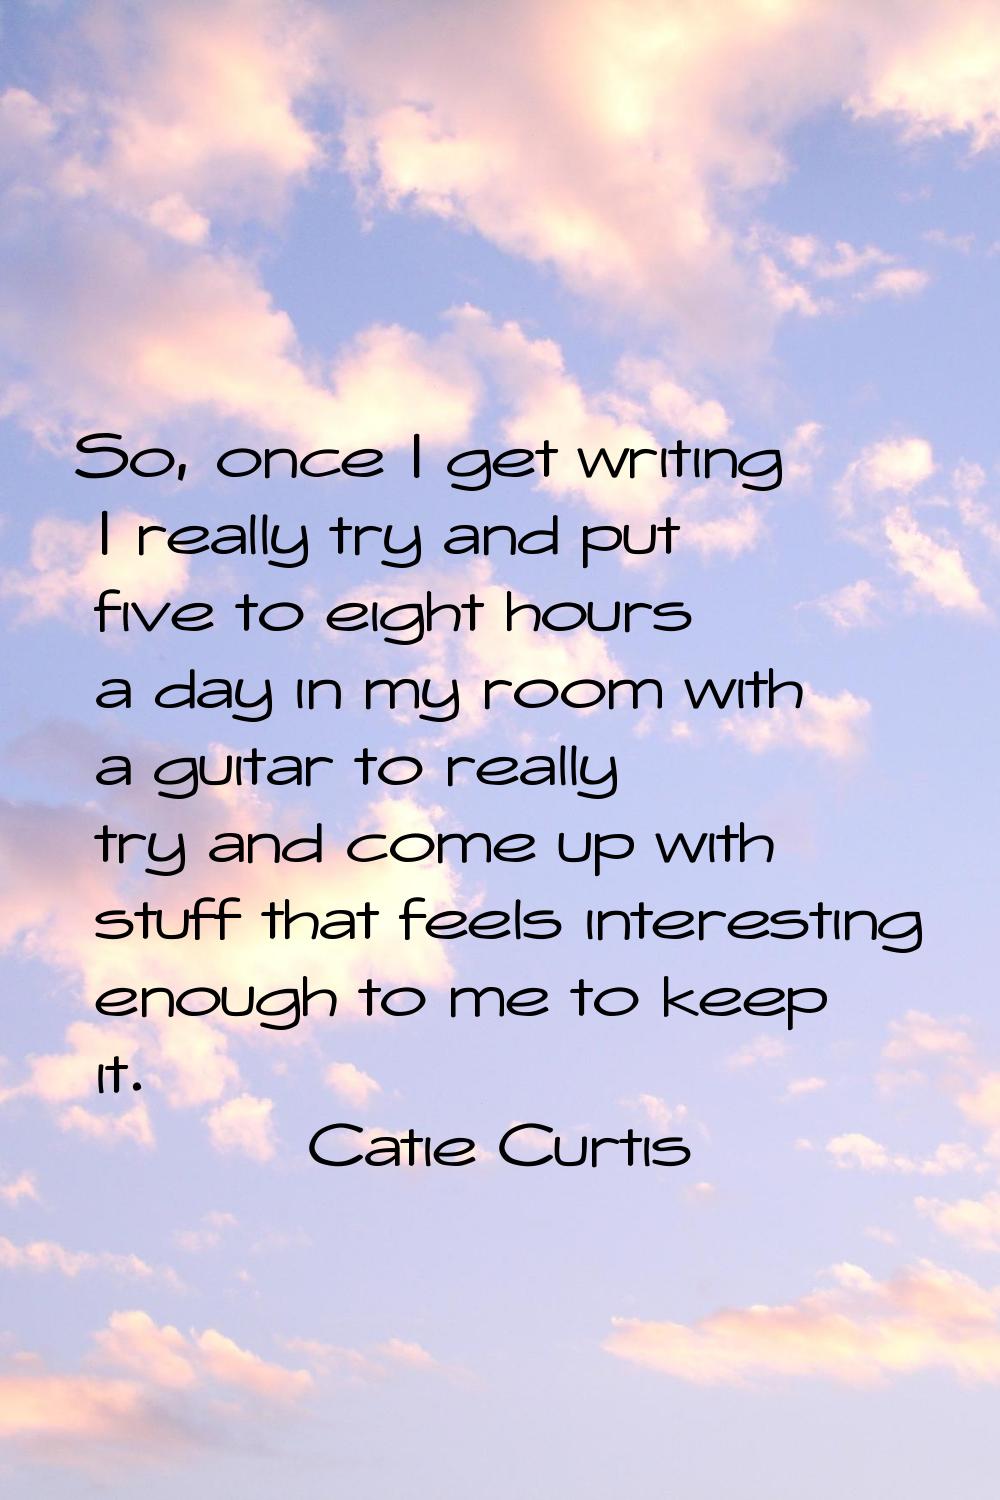 So, once I get writing I really try and put five to eight hours a day in my room with a guitar to r